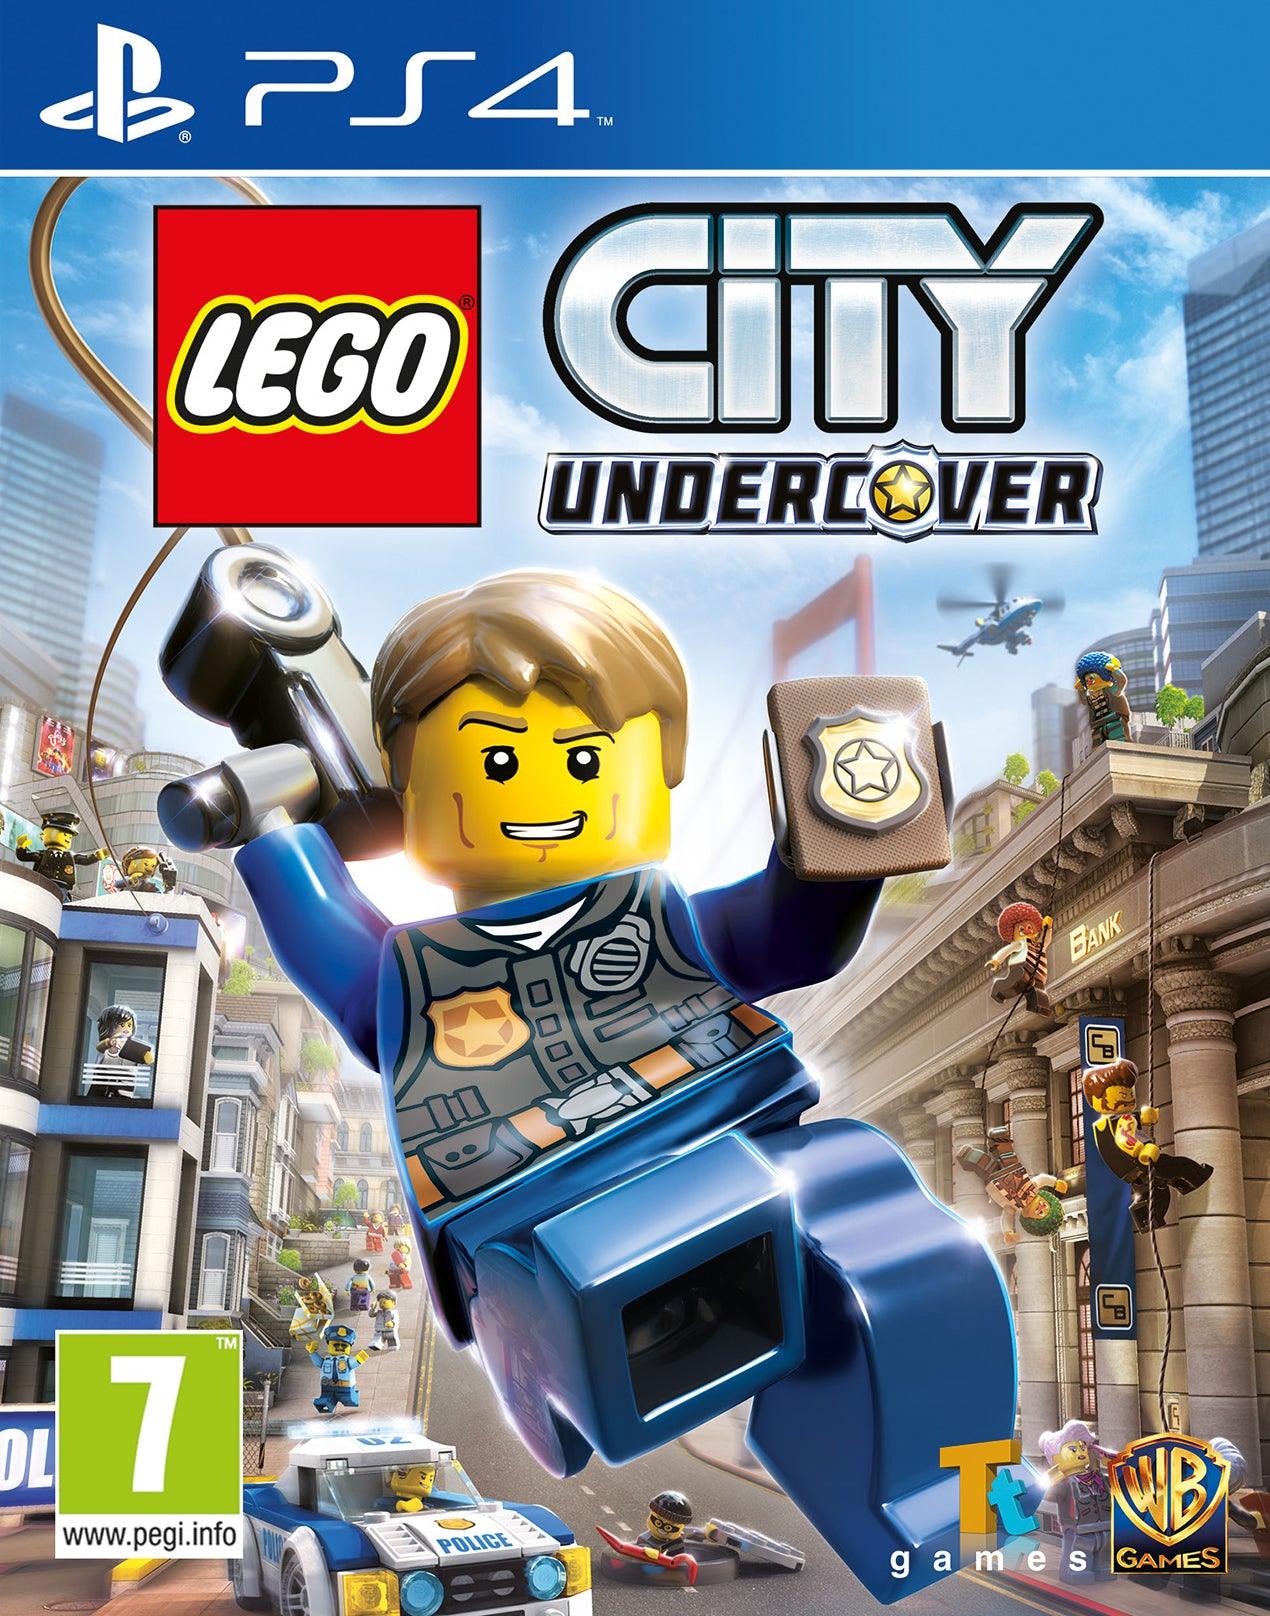 Lego City Undercover - Want a New Gadget